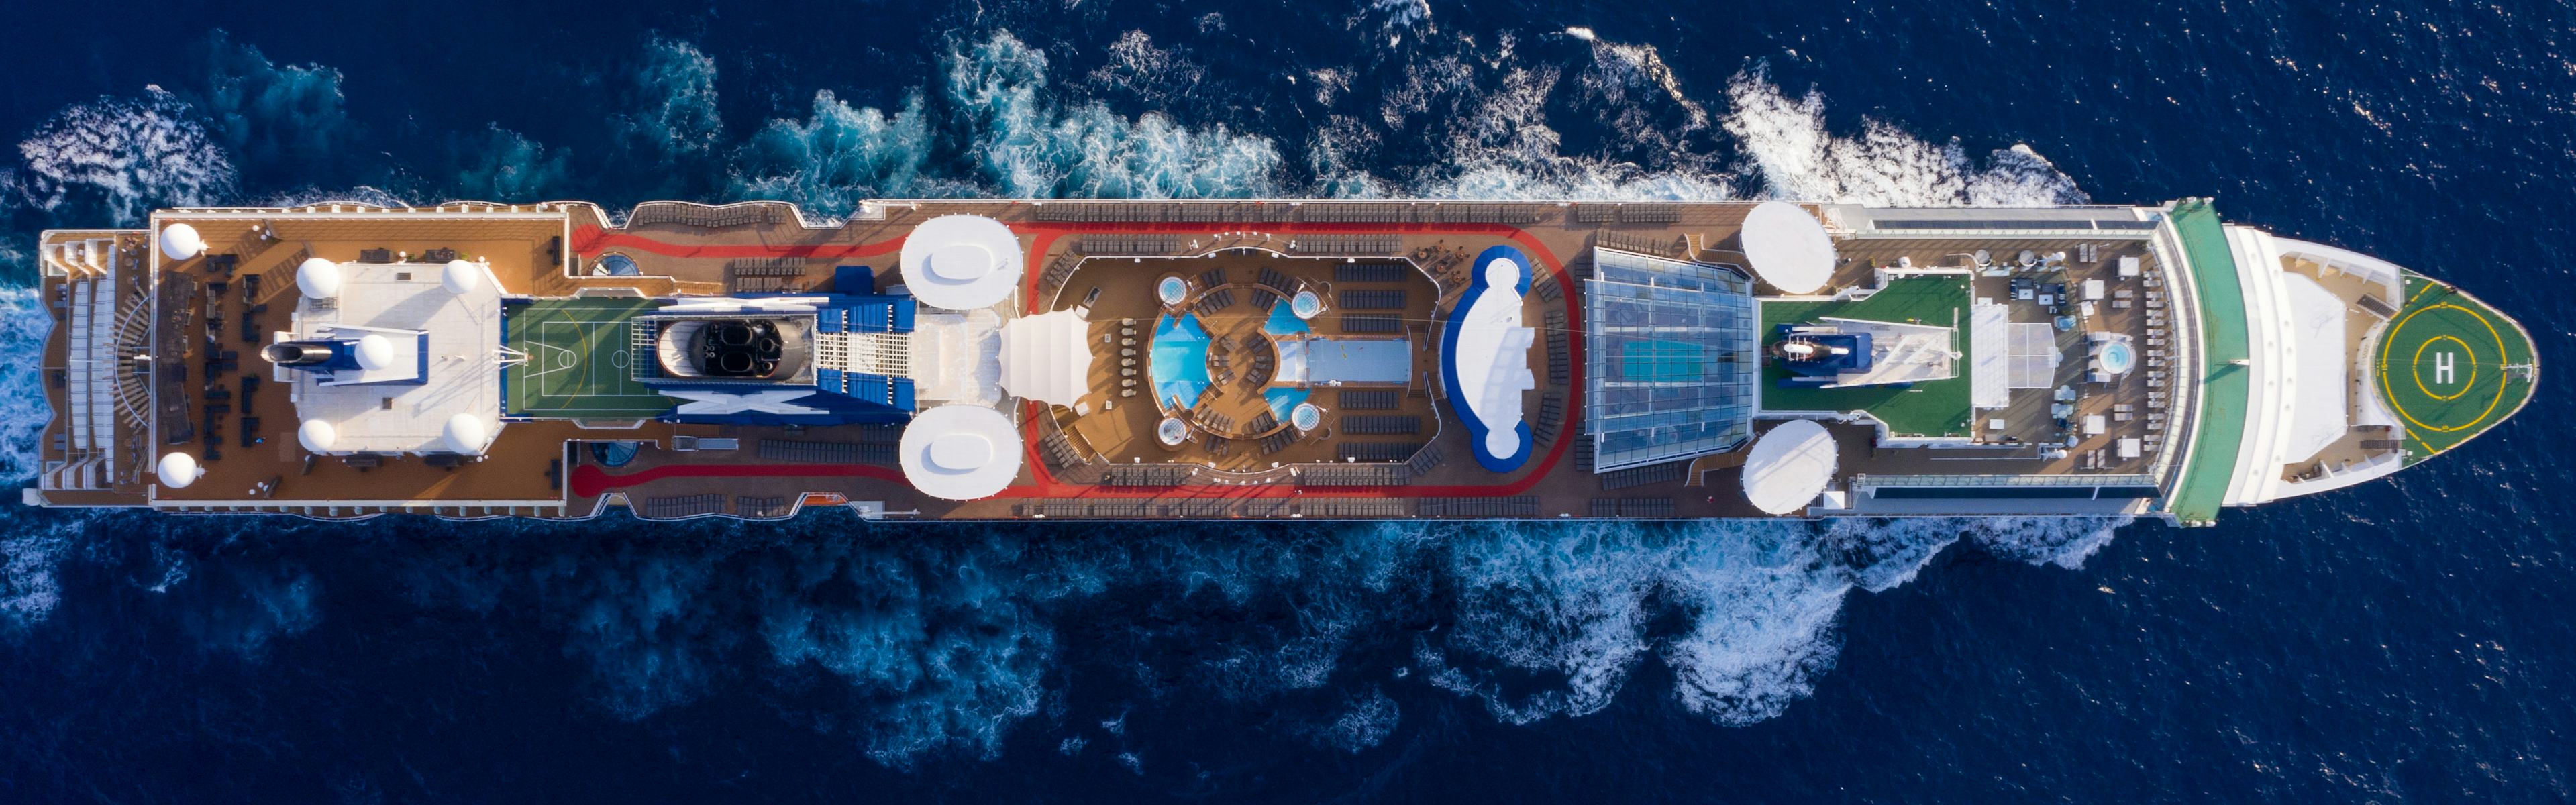 Top view of a Celebrity Cruise ship 